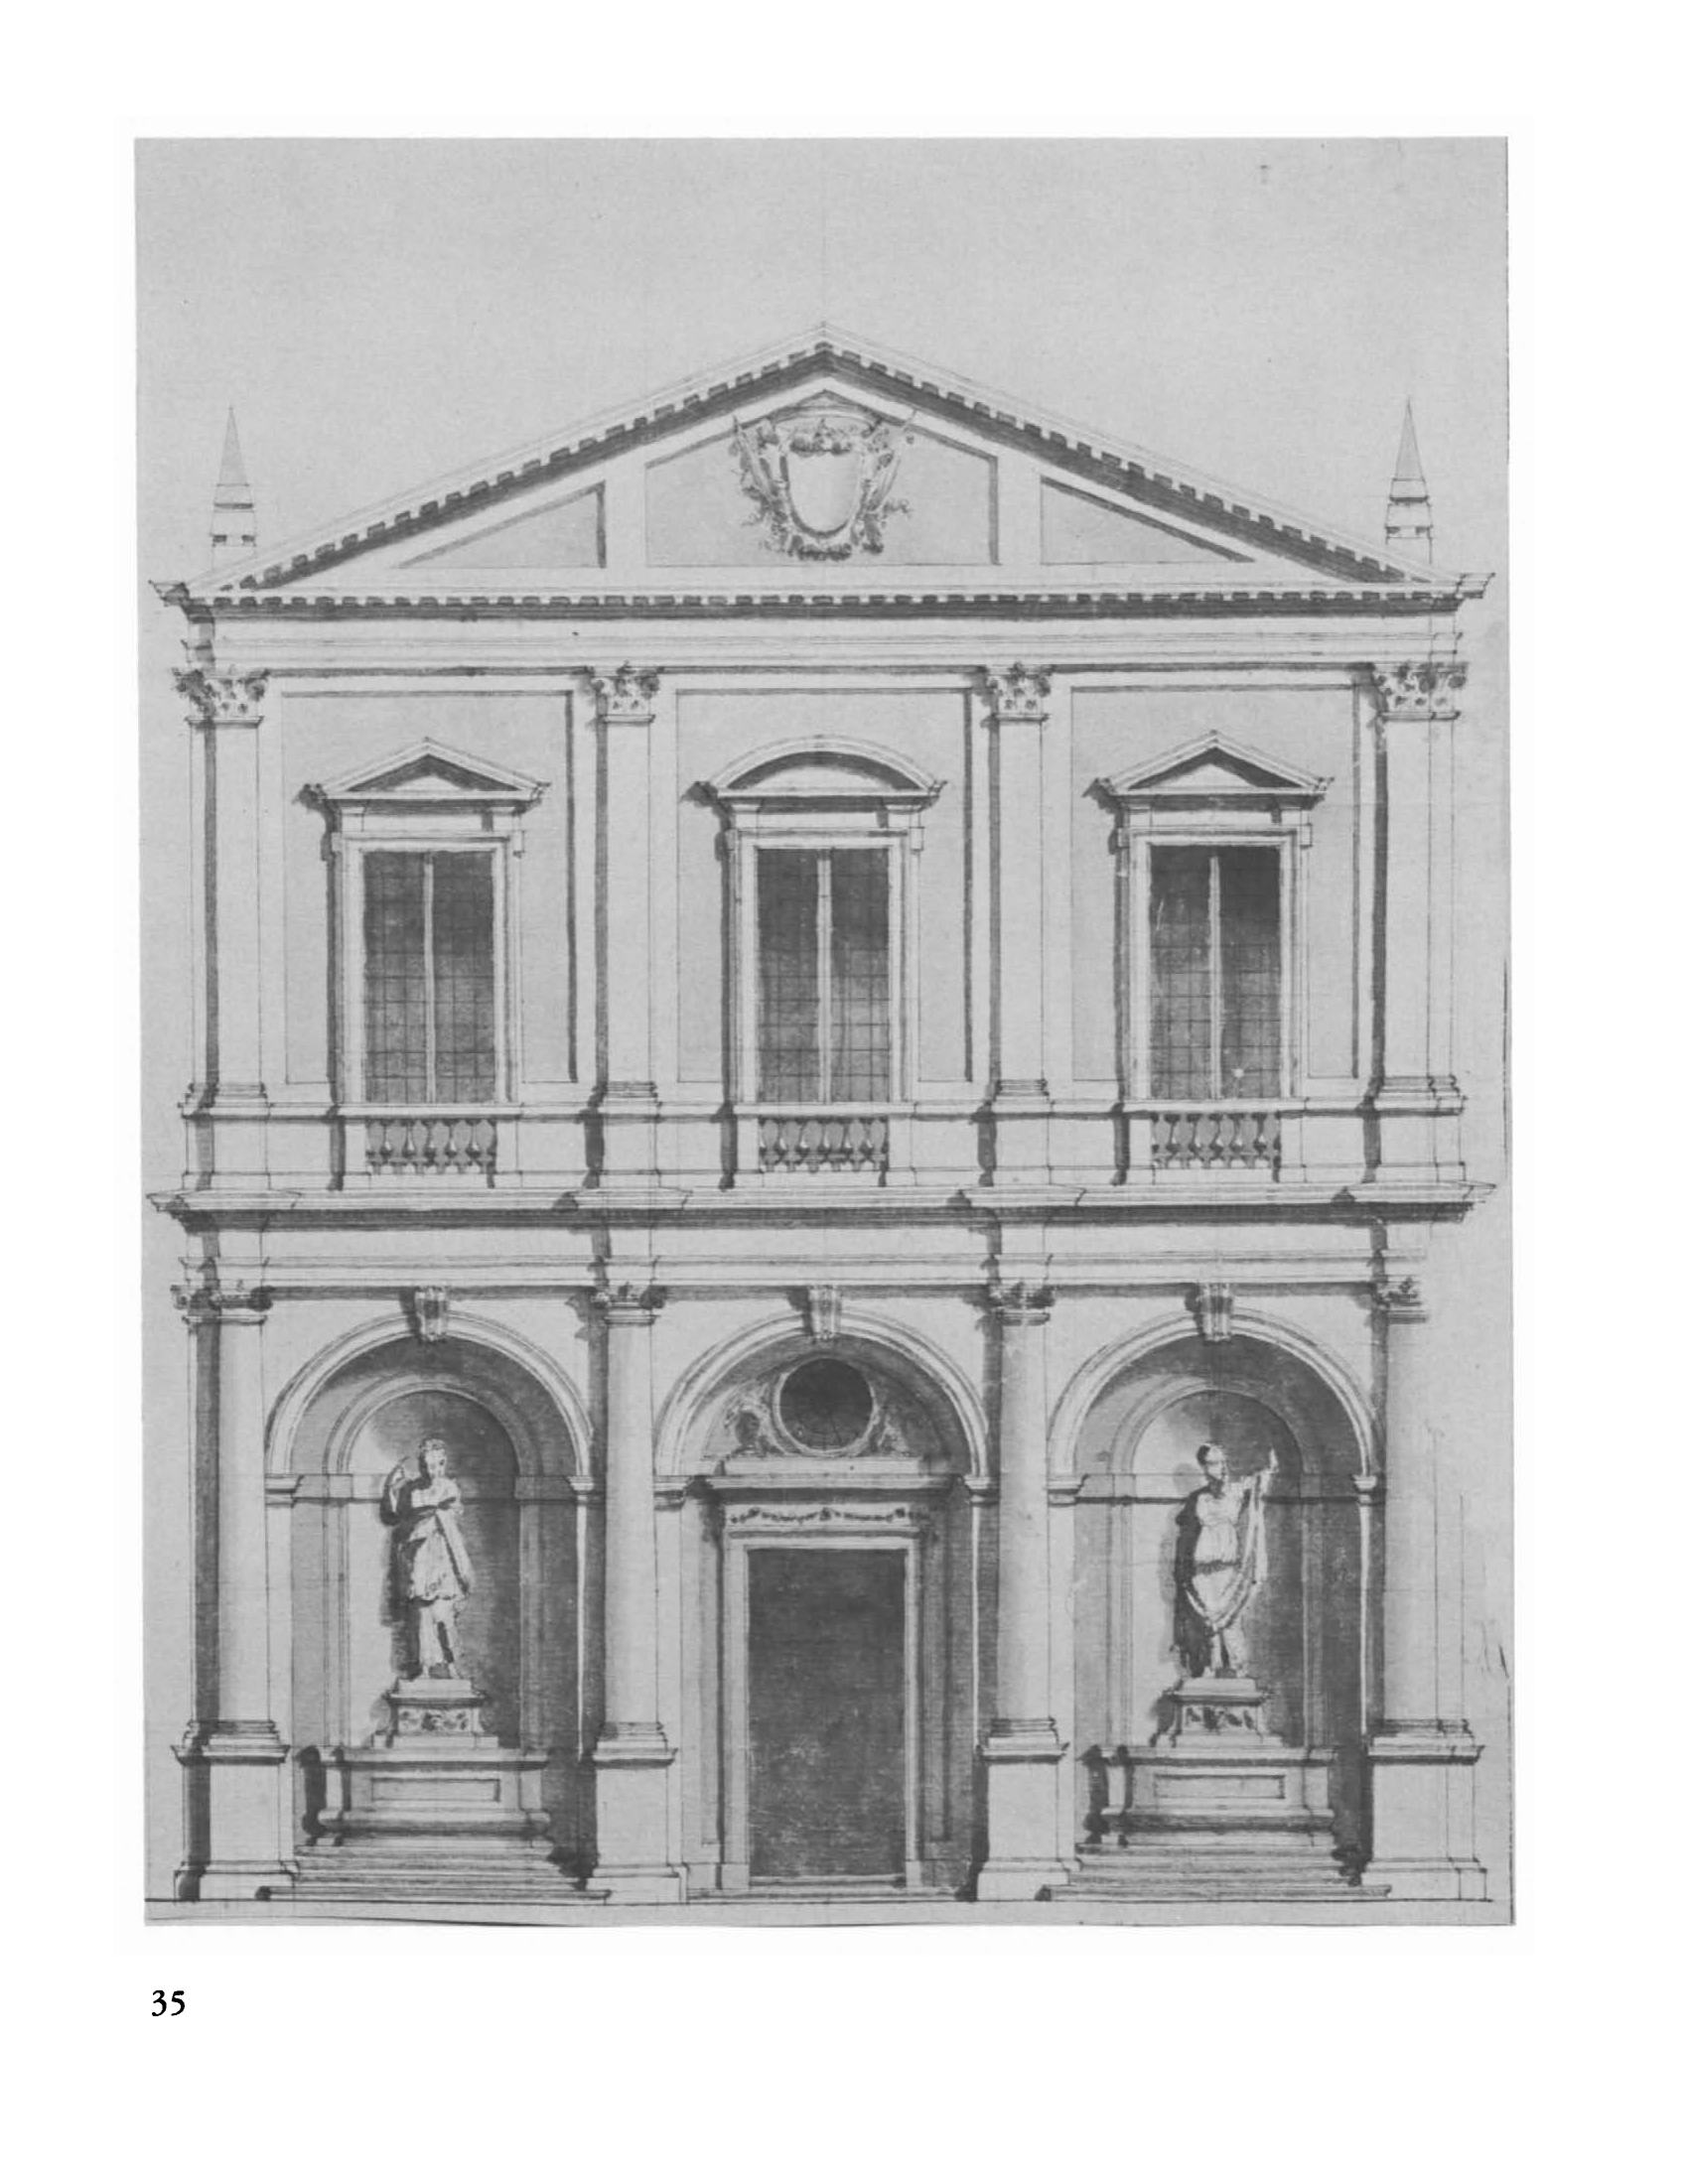 Architectural and Ornament Drawings: Juvarra, Vanvitelli, the Bibiena Family, and Other Italian Draughtsmen : Catalogue by Mary L. Myers. — New York : The Metropolitan Museum of Art, 1975